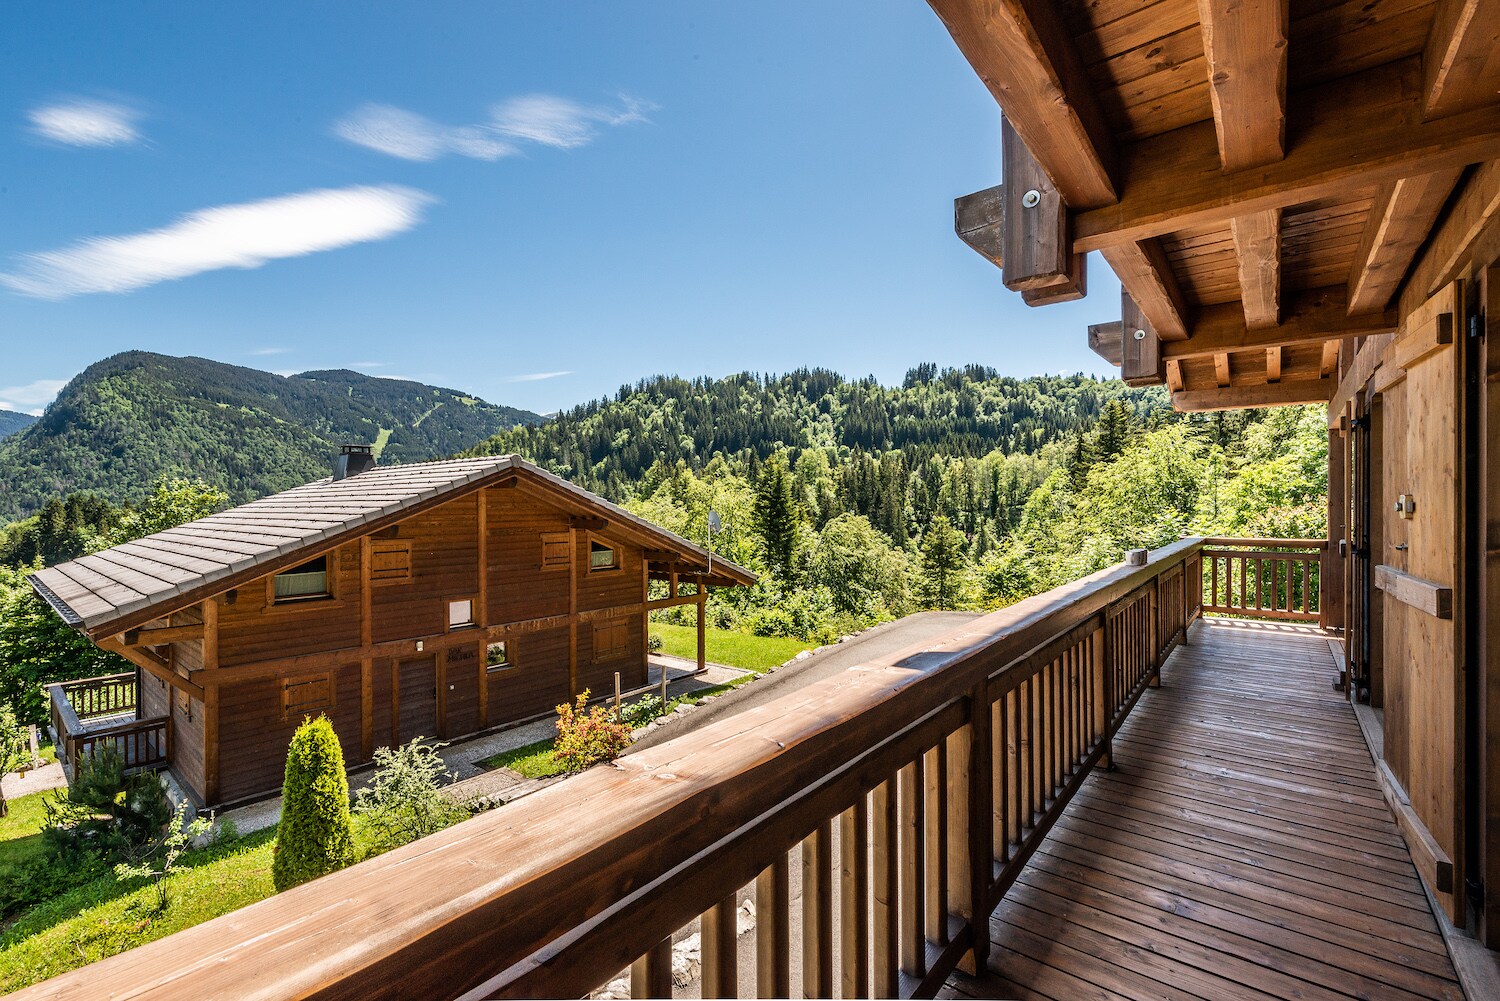 Property Image 1 - BALATA - Charming chalet with hot tub and views

